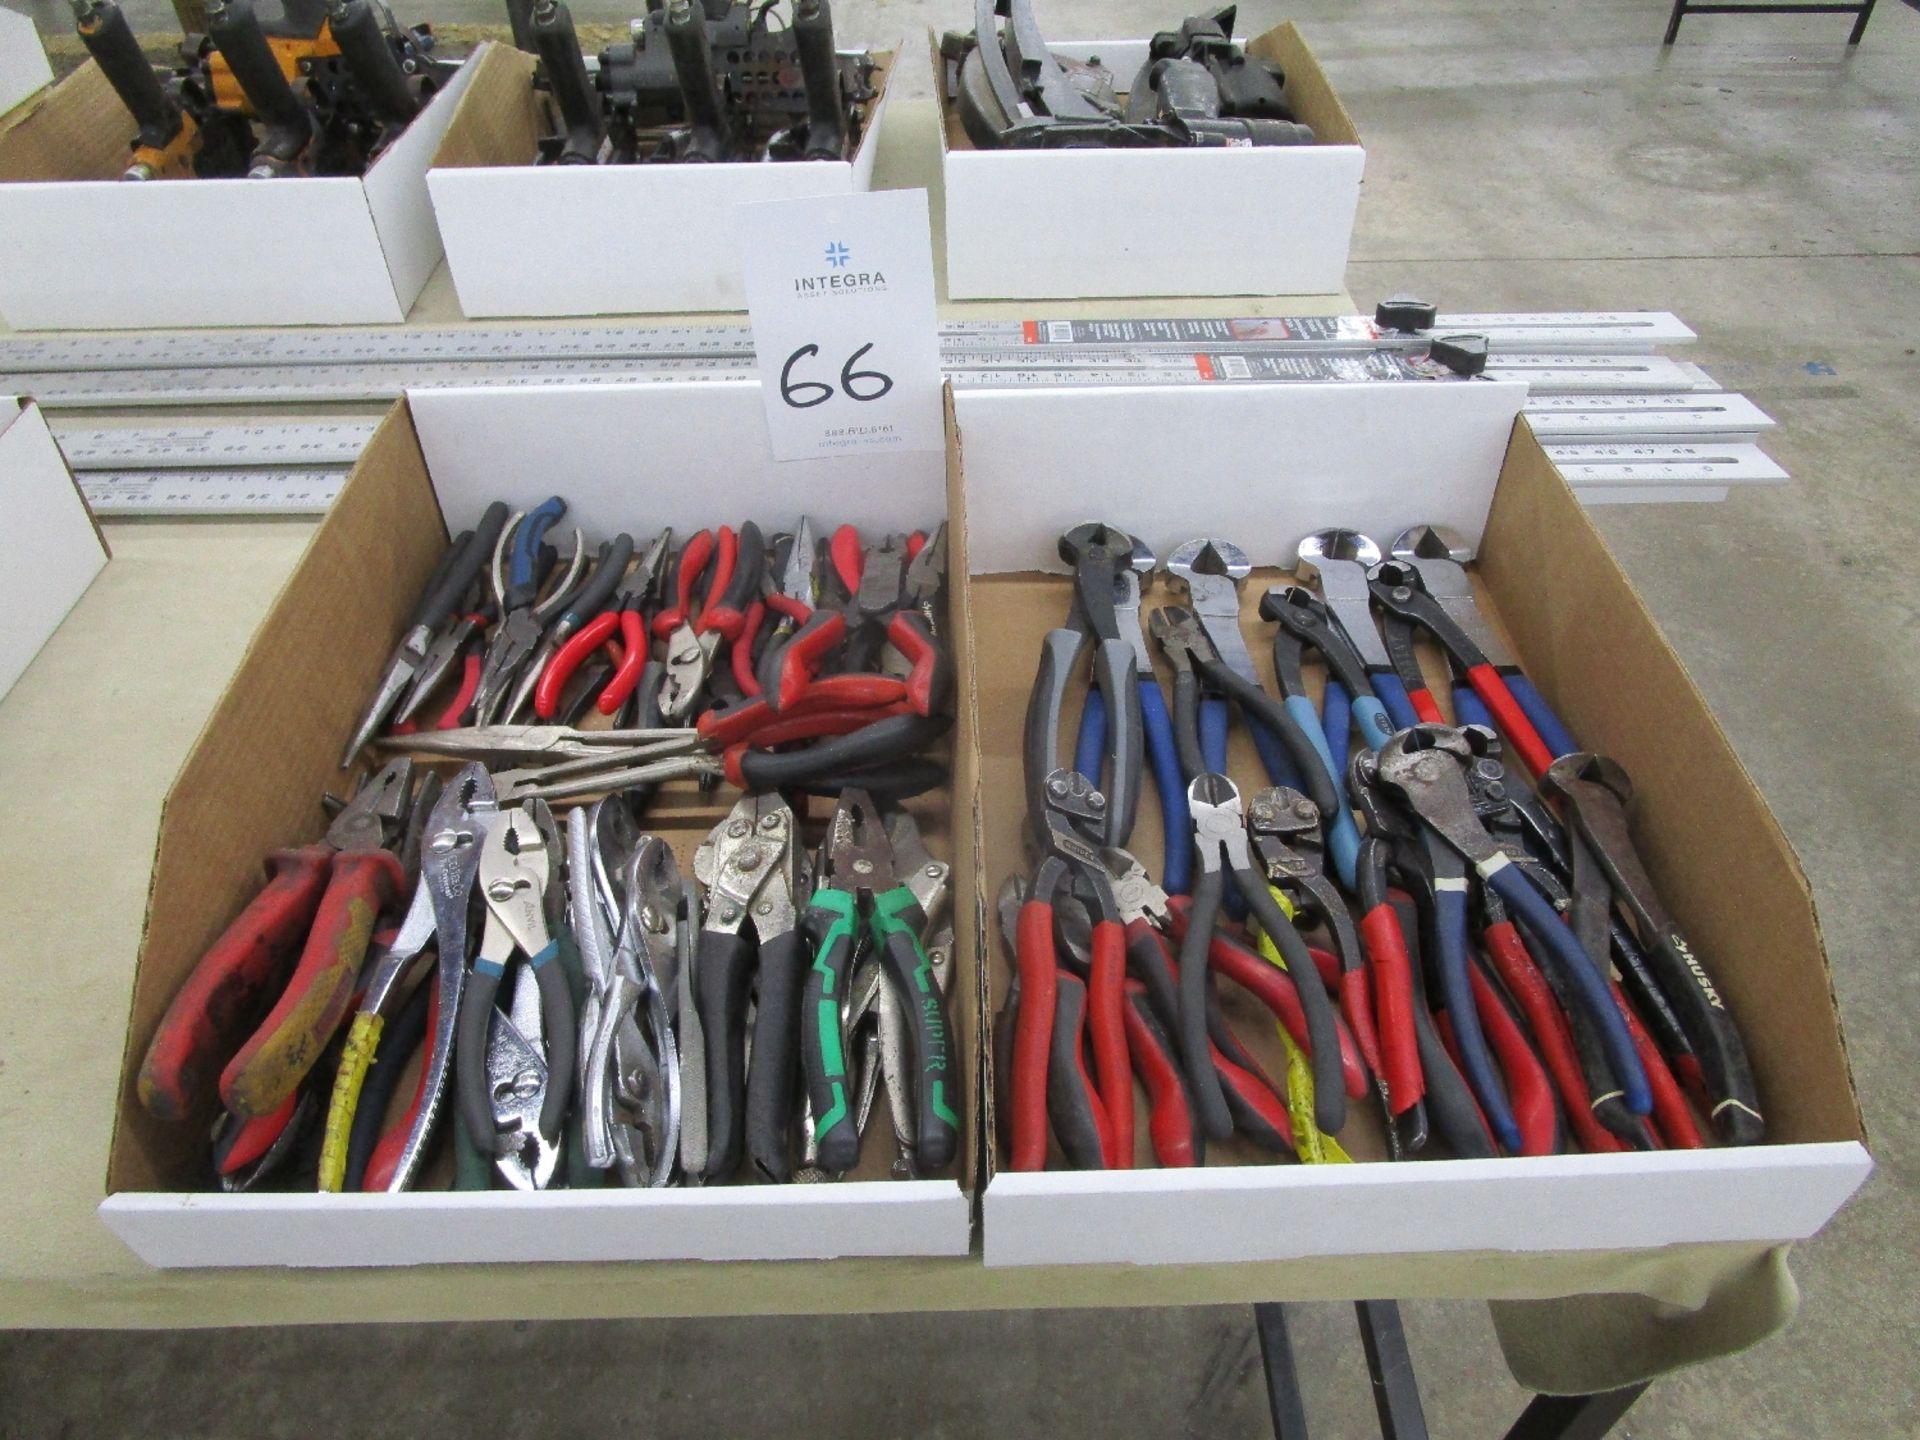 Lot of Assorted Slip Joint Pliers with Nippers